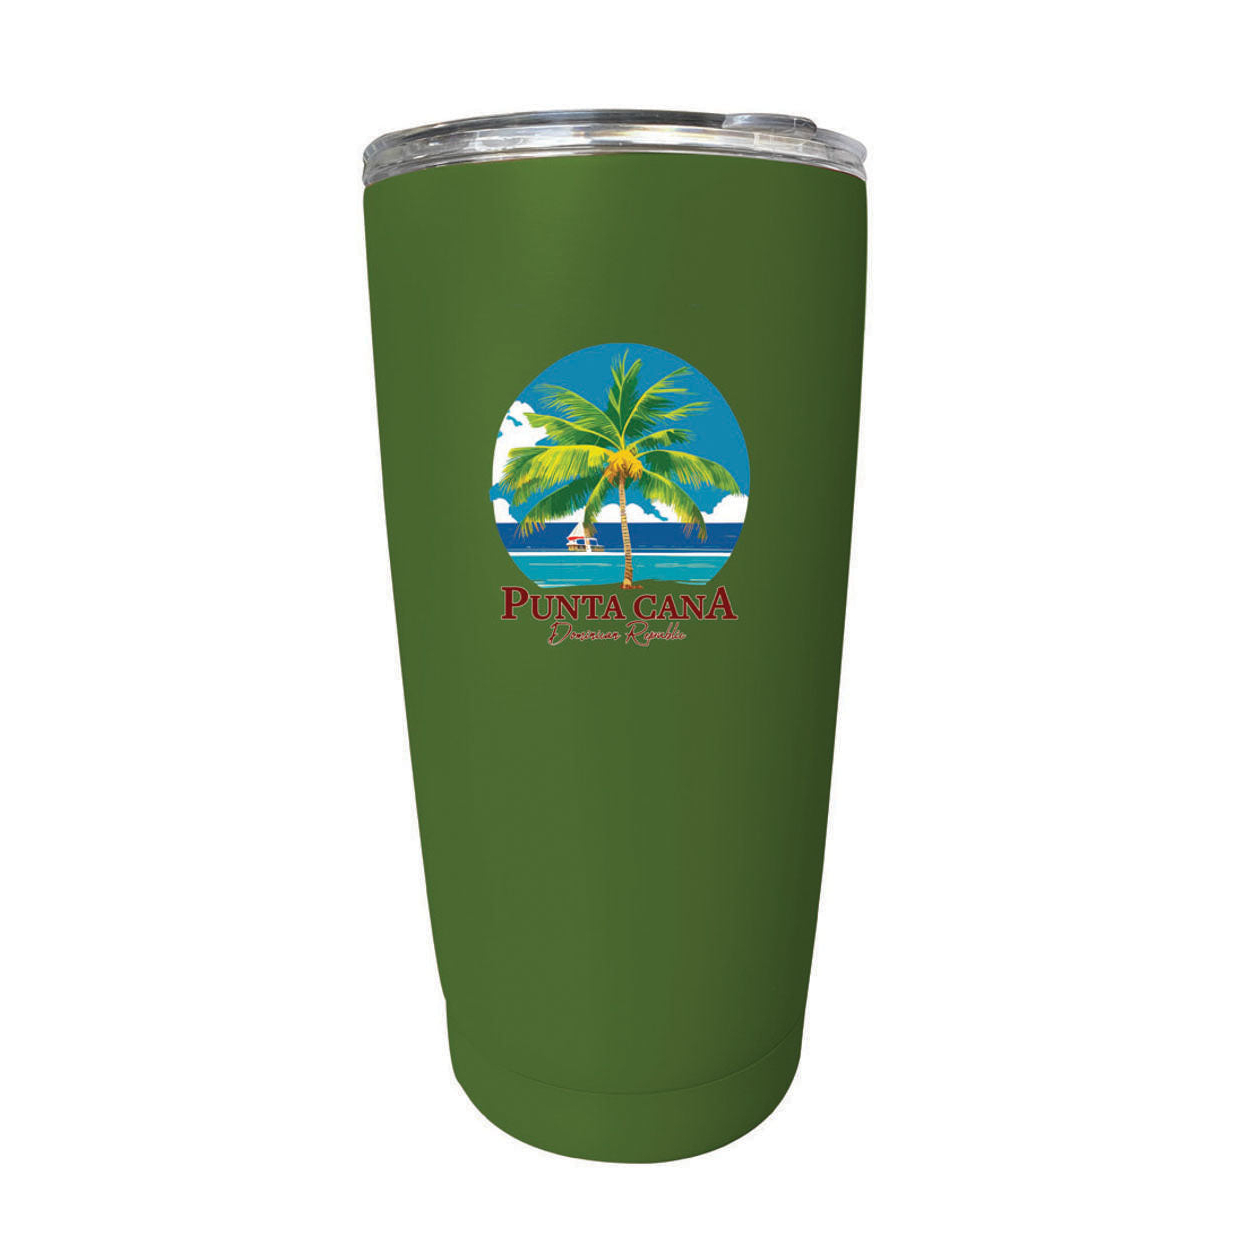 Punta Cana Dominican Republic Souvenir 16 Oz Stainless Steel Insulated Tumbler - Black, PARROT